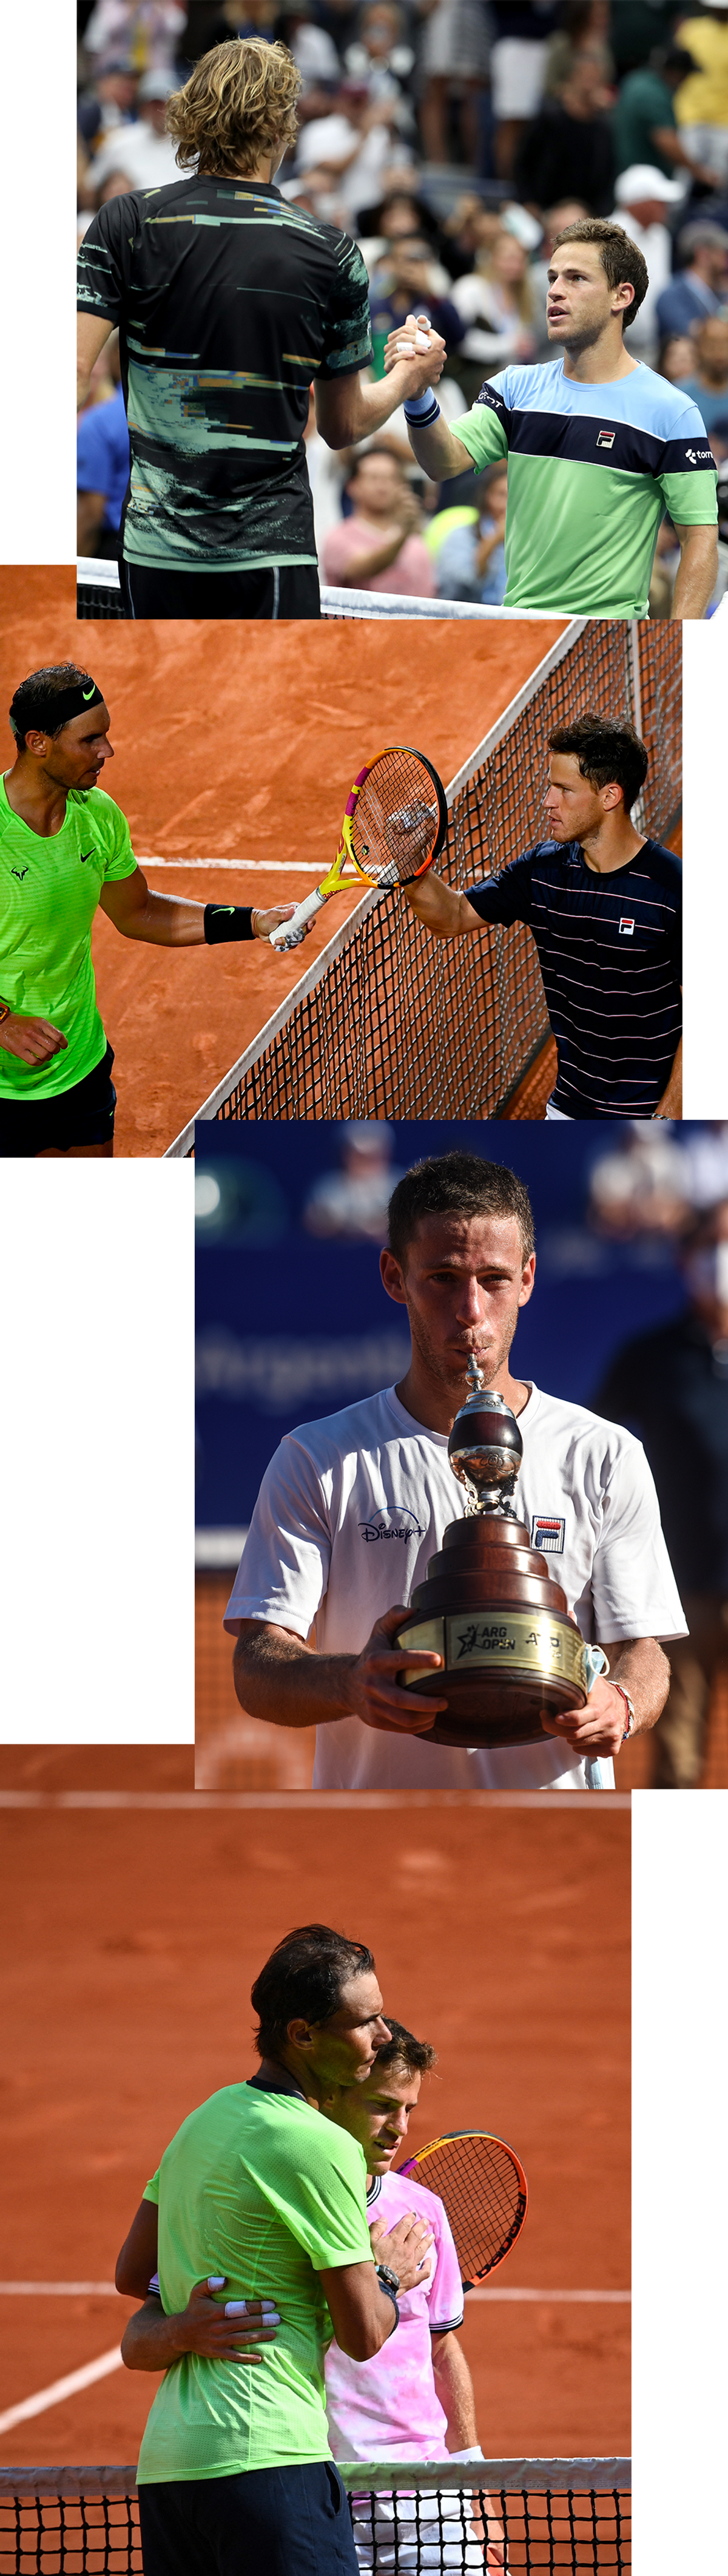 From top: With Alexander Zverev of Germany at the 2019 US Open; after beating Rafael Nadal in Rome, Sept. 19, 2020; winning the 2021 ATP Buenos Aires Argentina Open; after losing to Nadal at the 2021 French Open in Paris